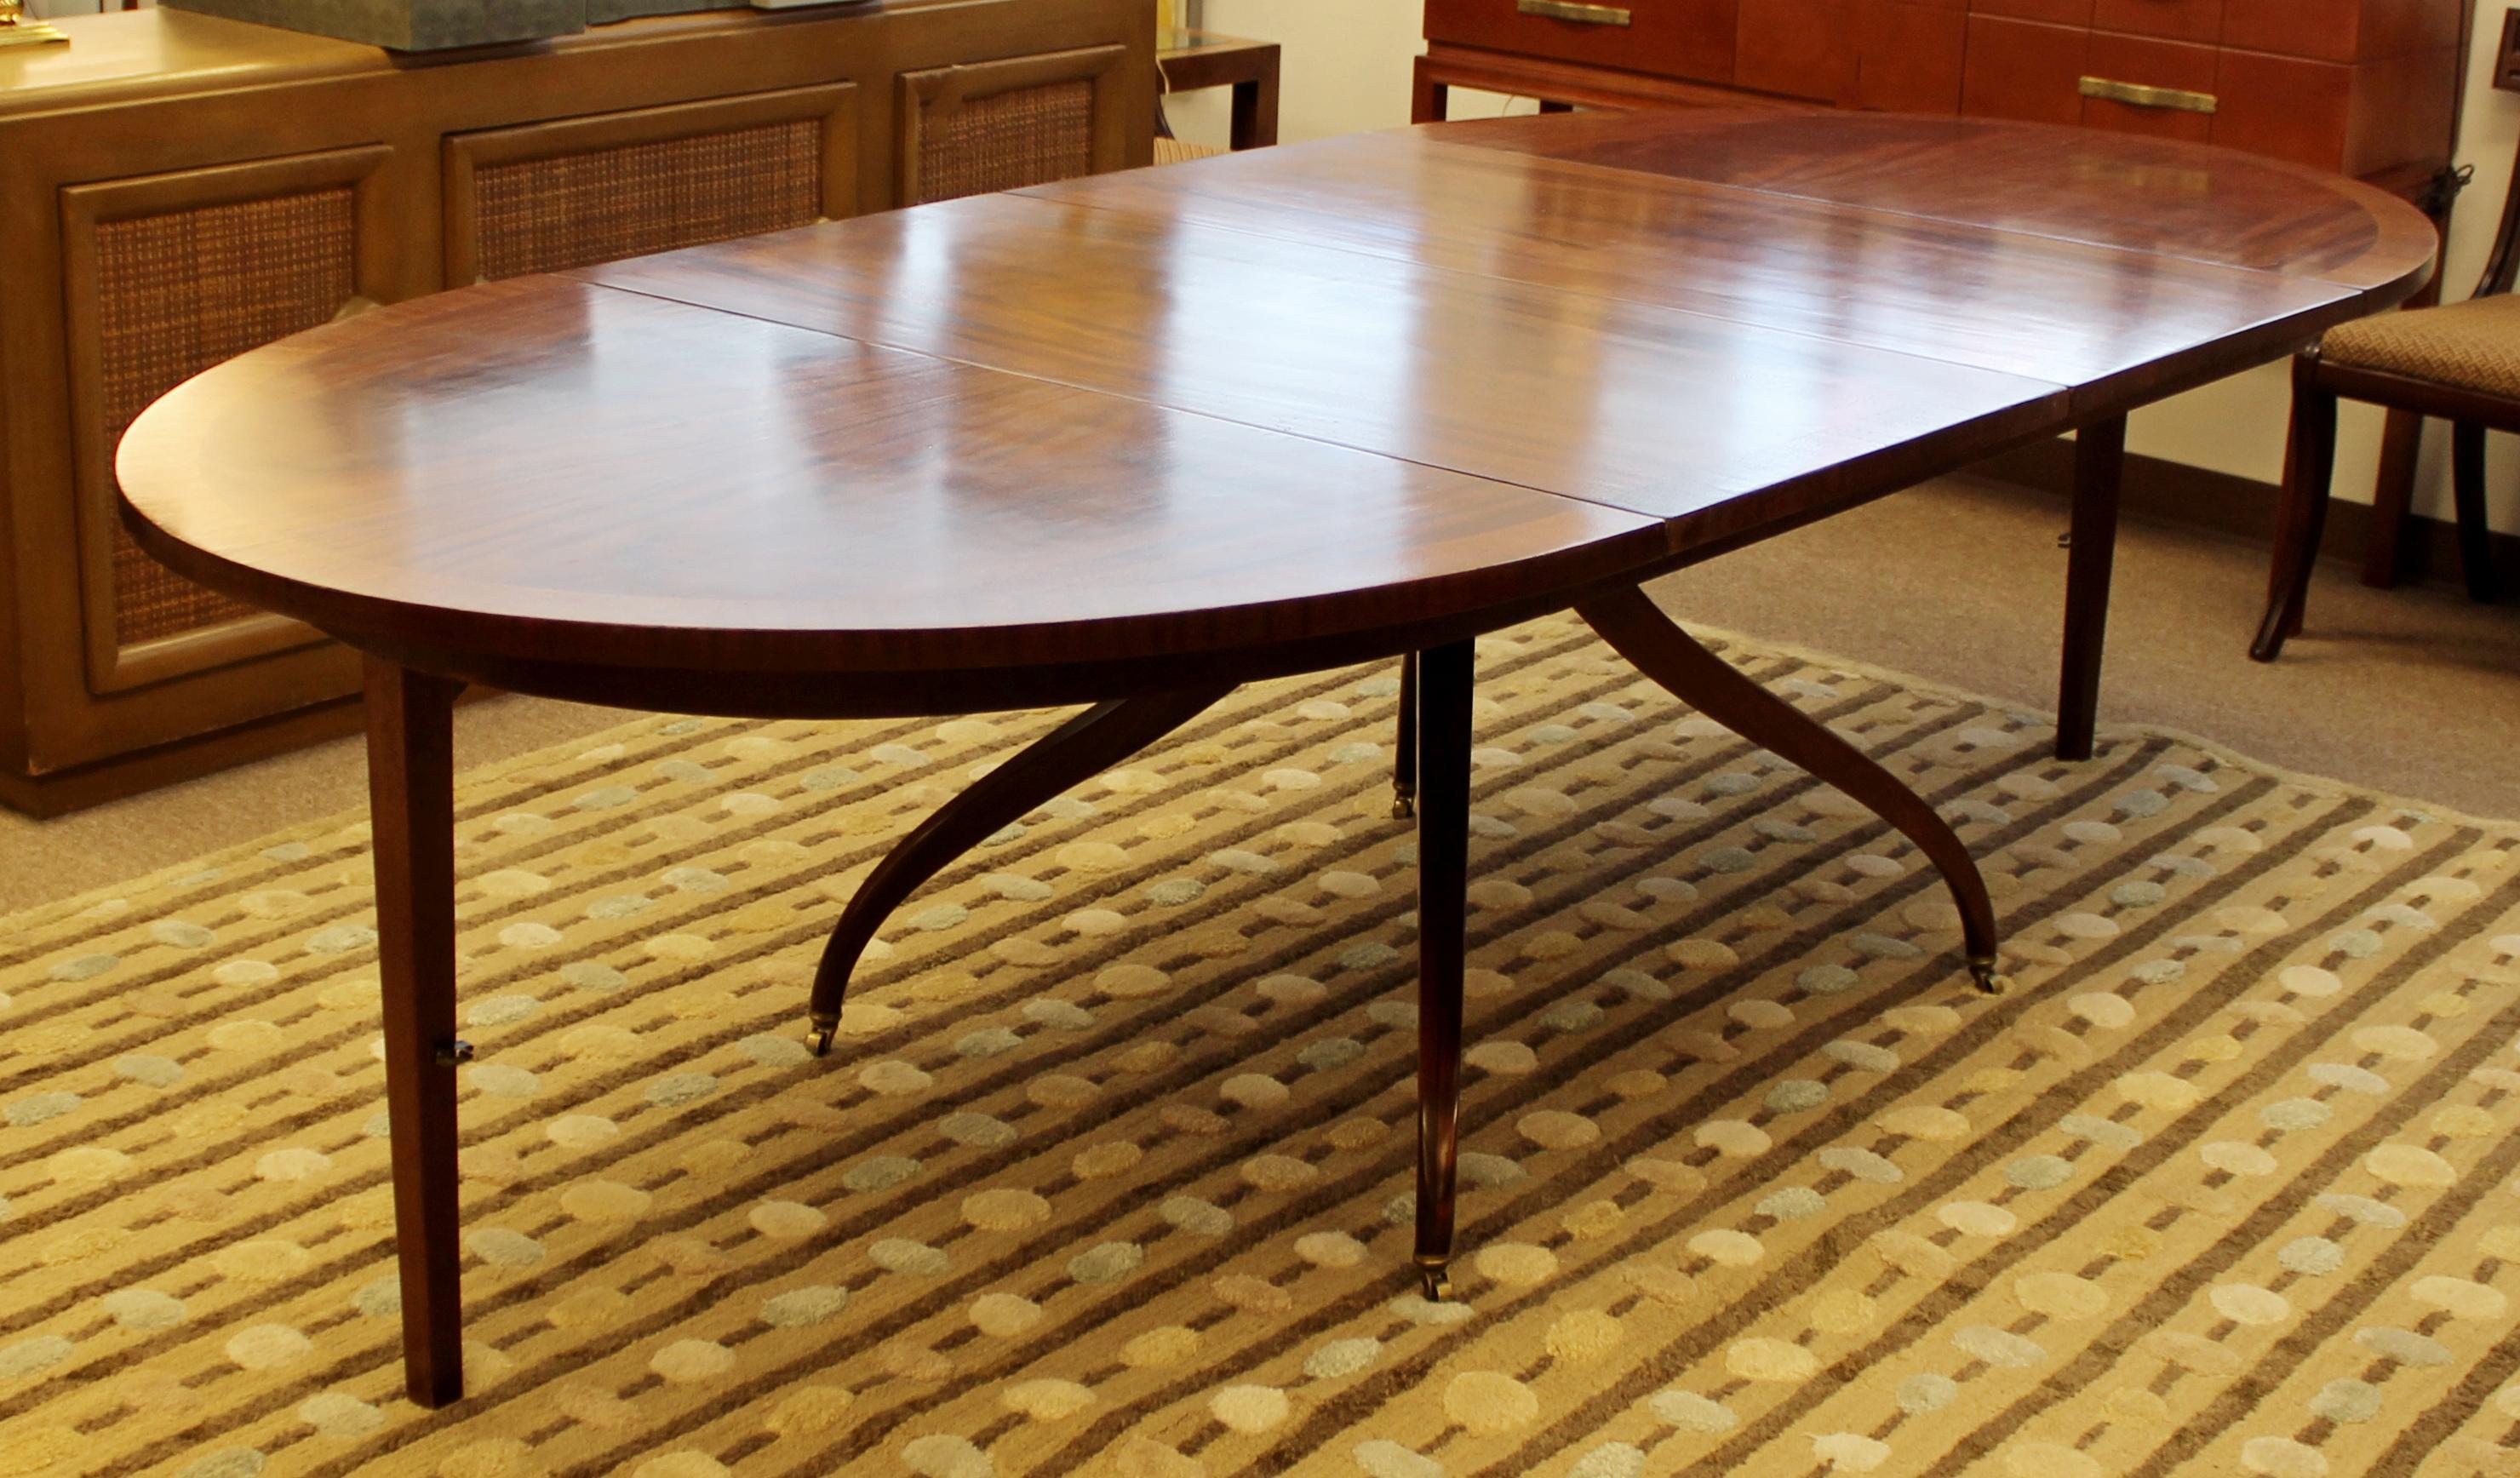 For your consideration is a phenomenal oval drop leaf dining table, made of two-tone wood with brass accents on the feet, with two leaves and legs that drop down or fold up, by Edward Wormley for Dunbar, circa 1960s. In good condition. The